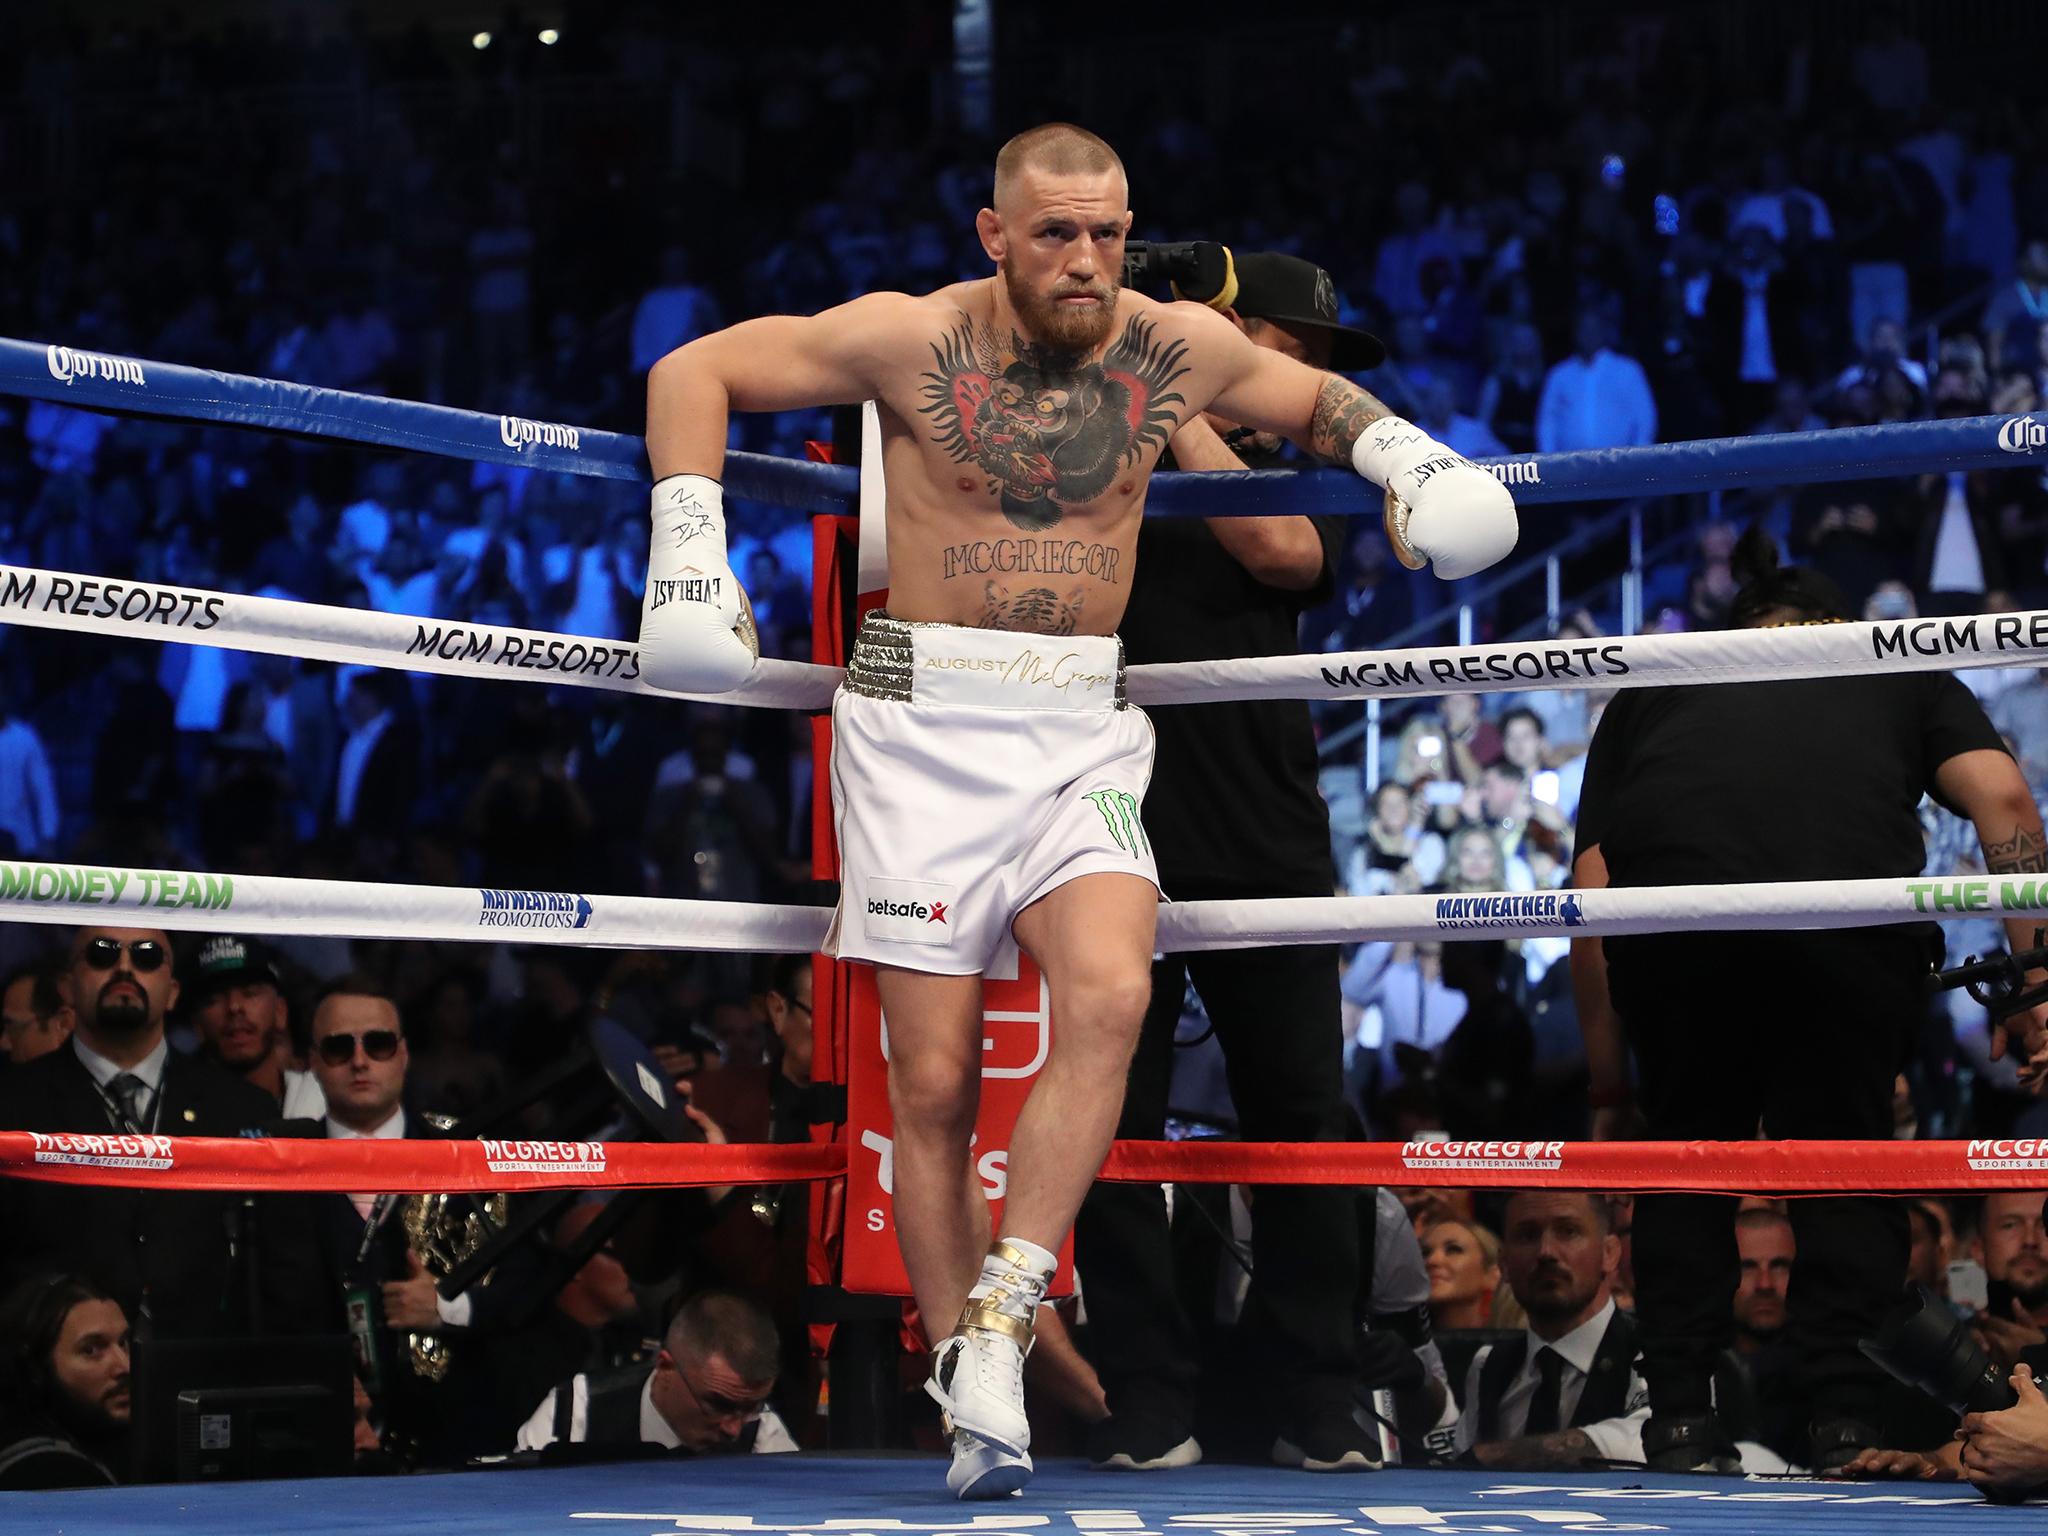 Conor McGregor lasted 10 rounds against Floyd Mayweather